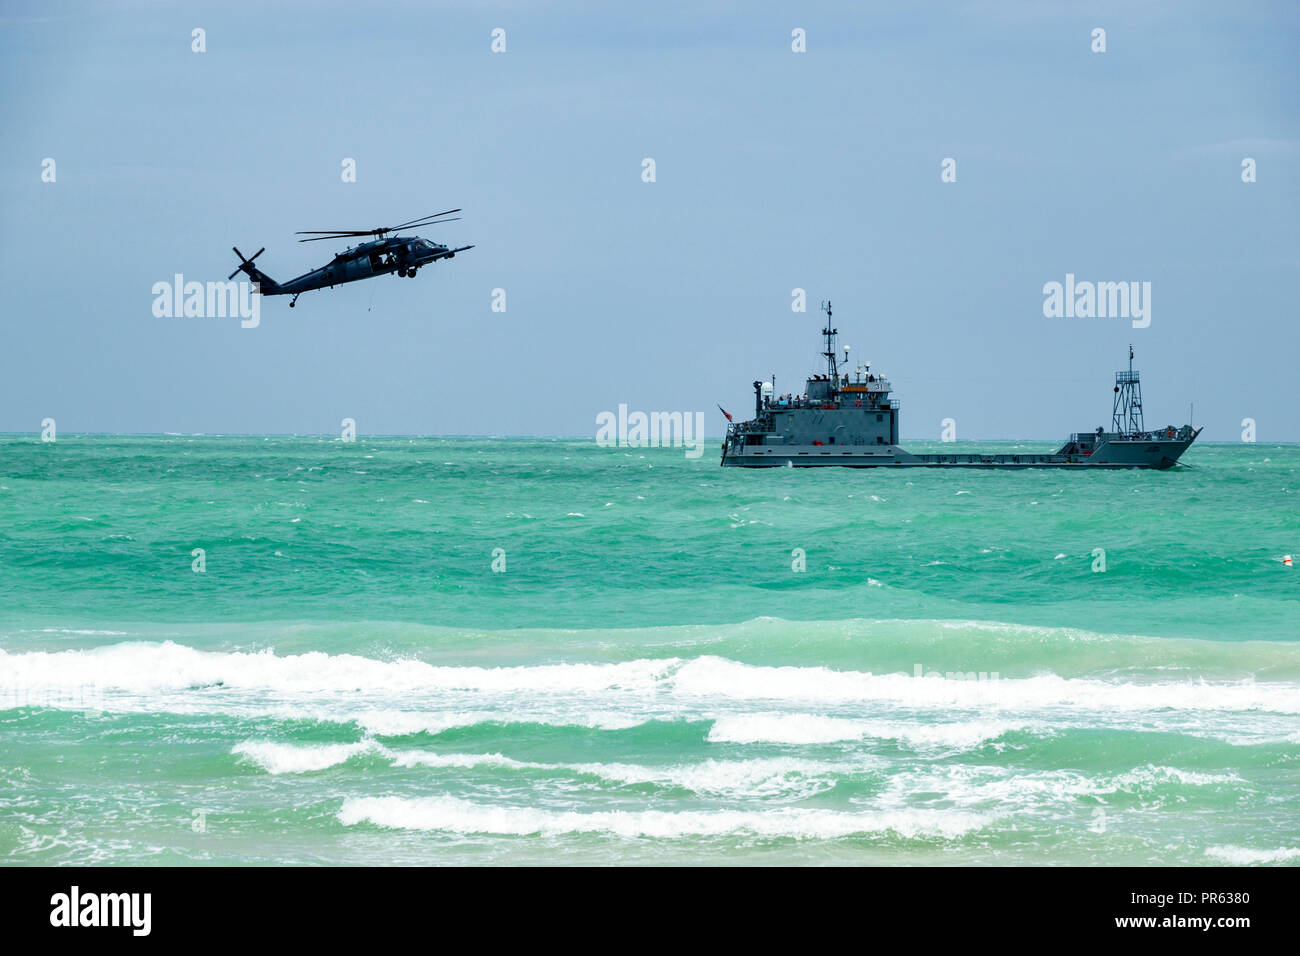 Miami Beach Florida,National Salute to America's Heroes Air & Sea water Show,Sikorsky MH-60G/HH-60G Pave Hawk twin-turboshaft engine helicopter,Atlant Stock Photo